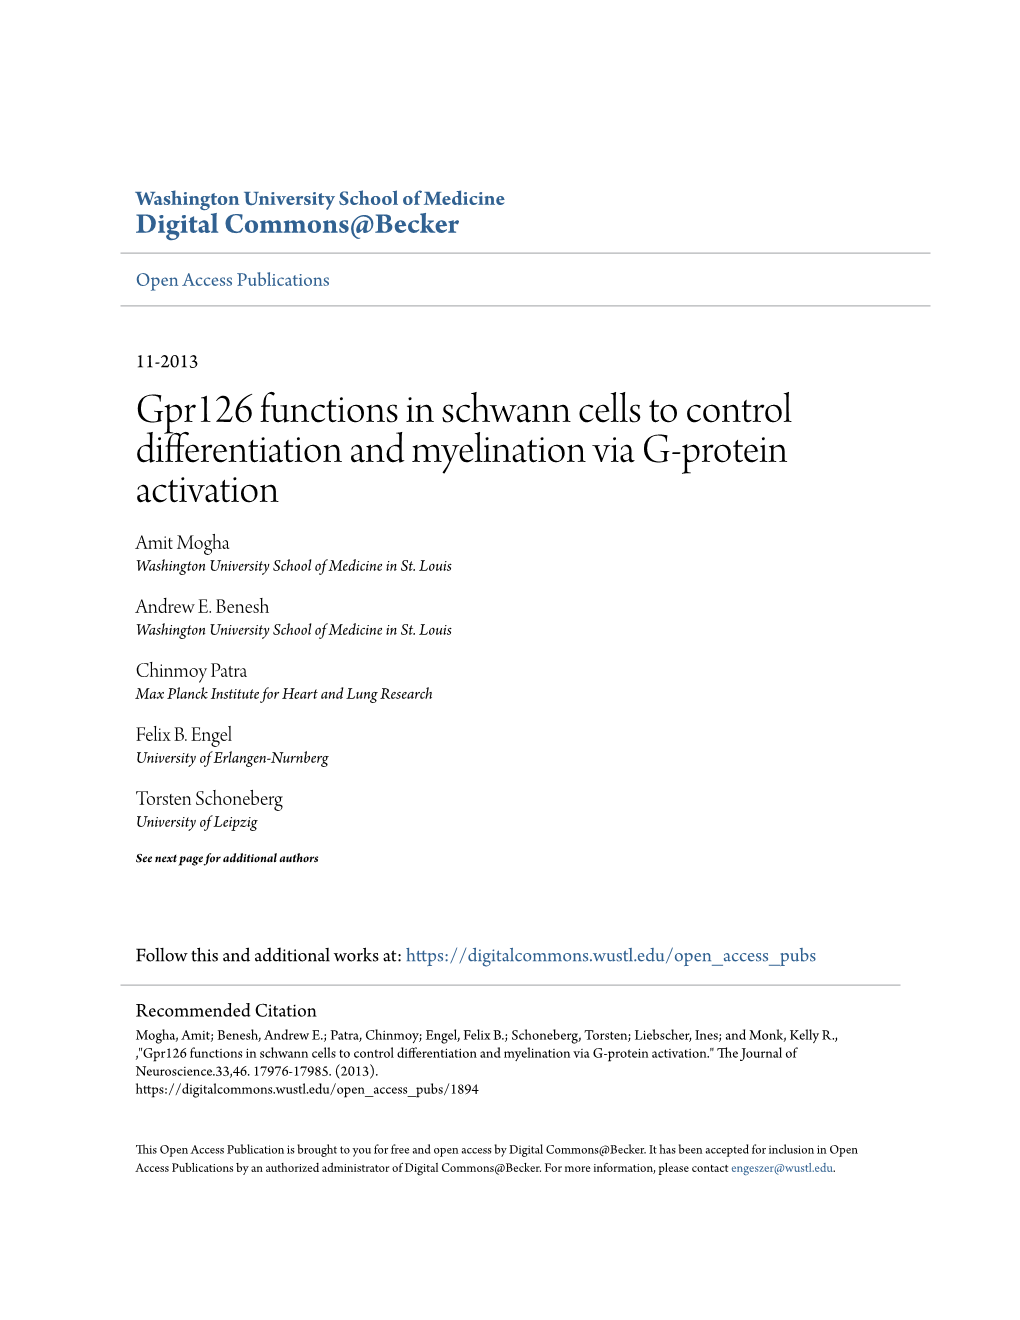 Gpr126 Functions in Schwann Cells to Control Differentiation and Myelination Via G-Protein Activation Amit Mogha Washington University School of Medicine in St